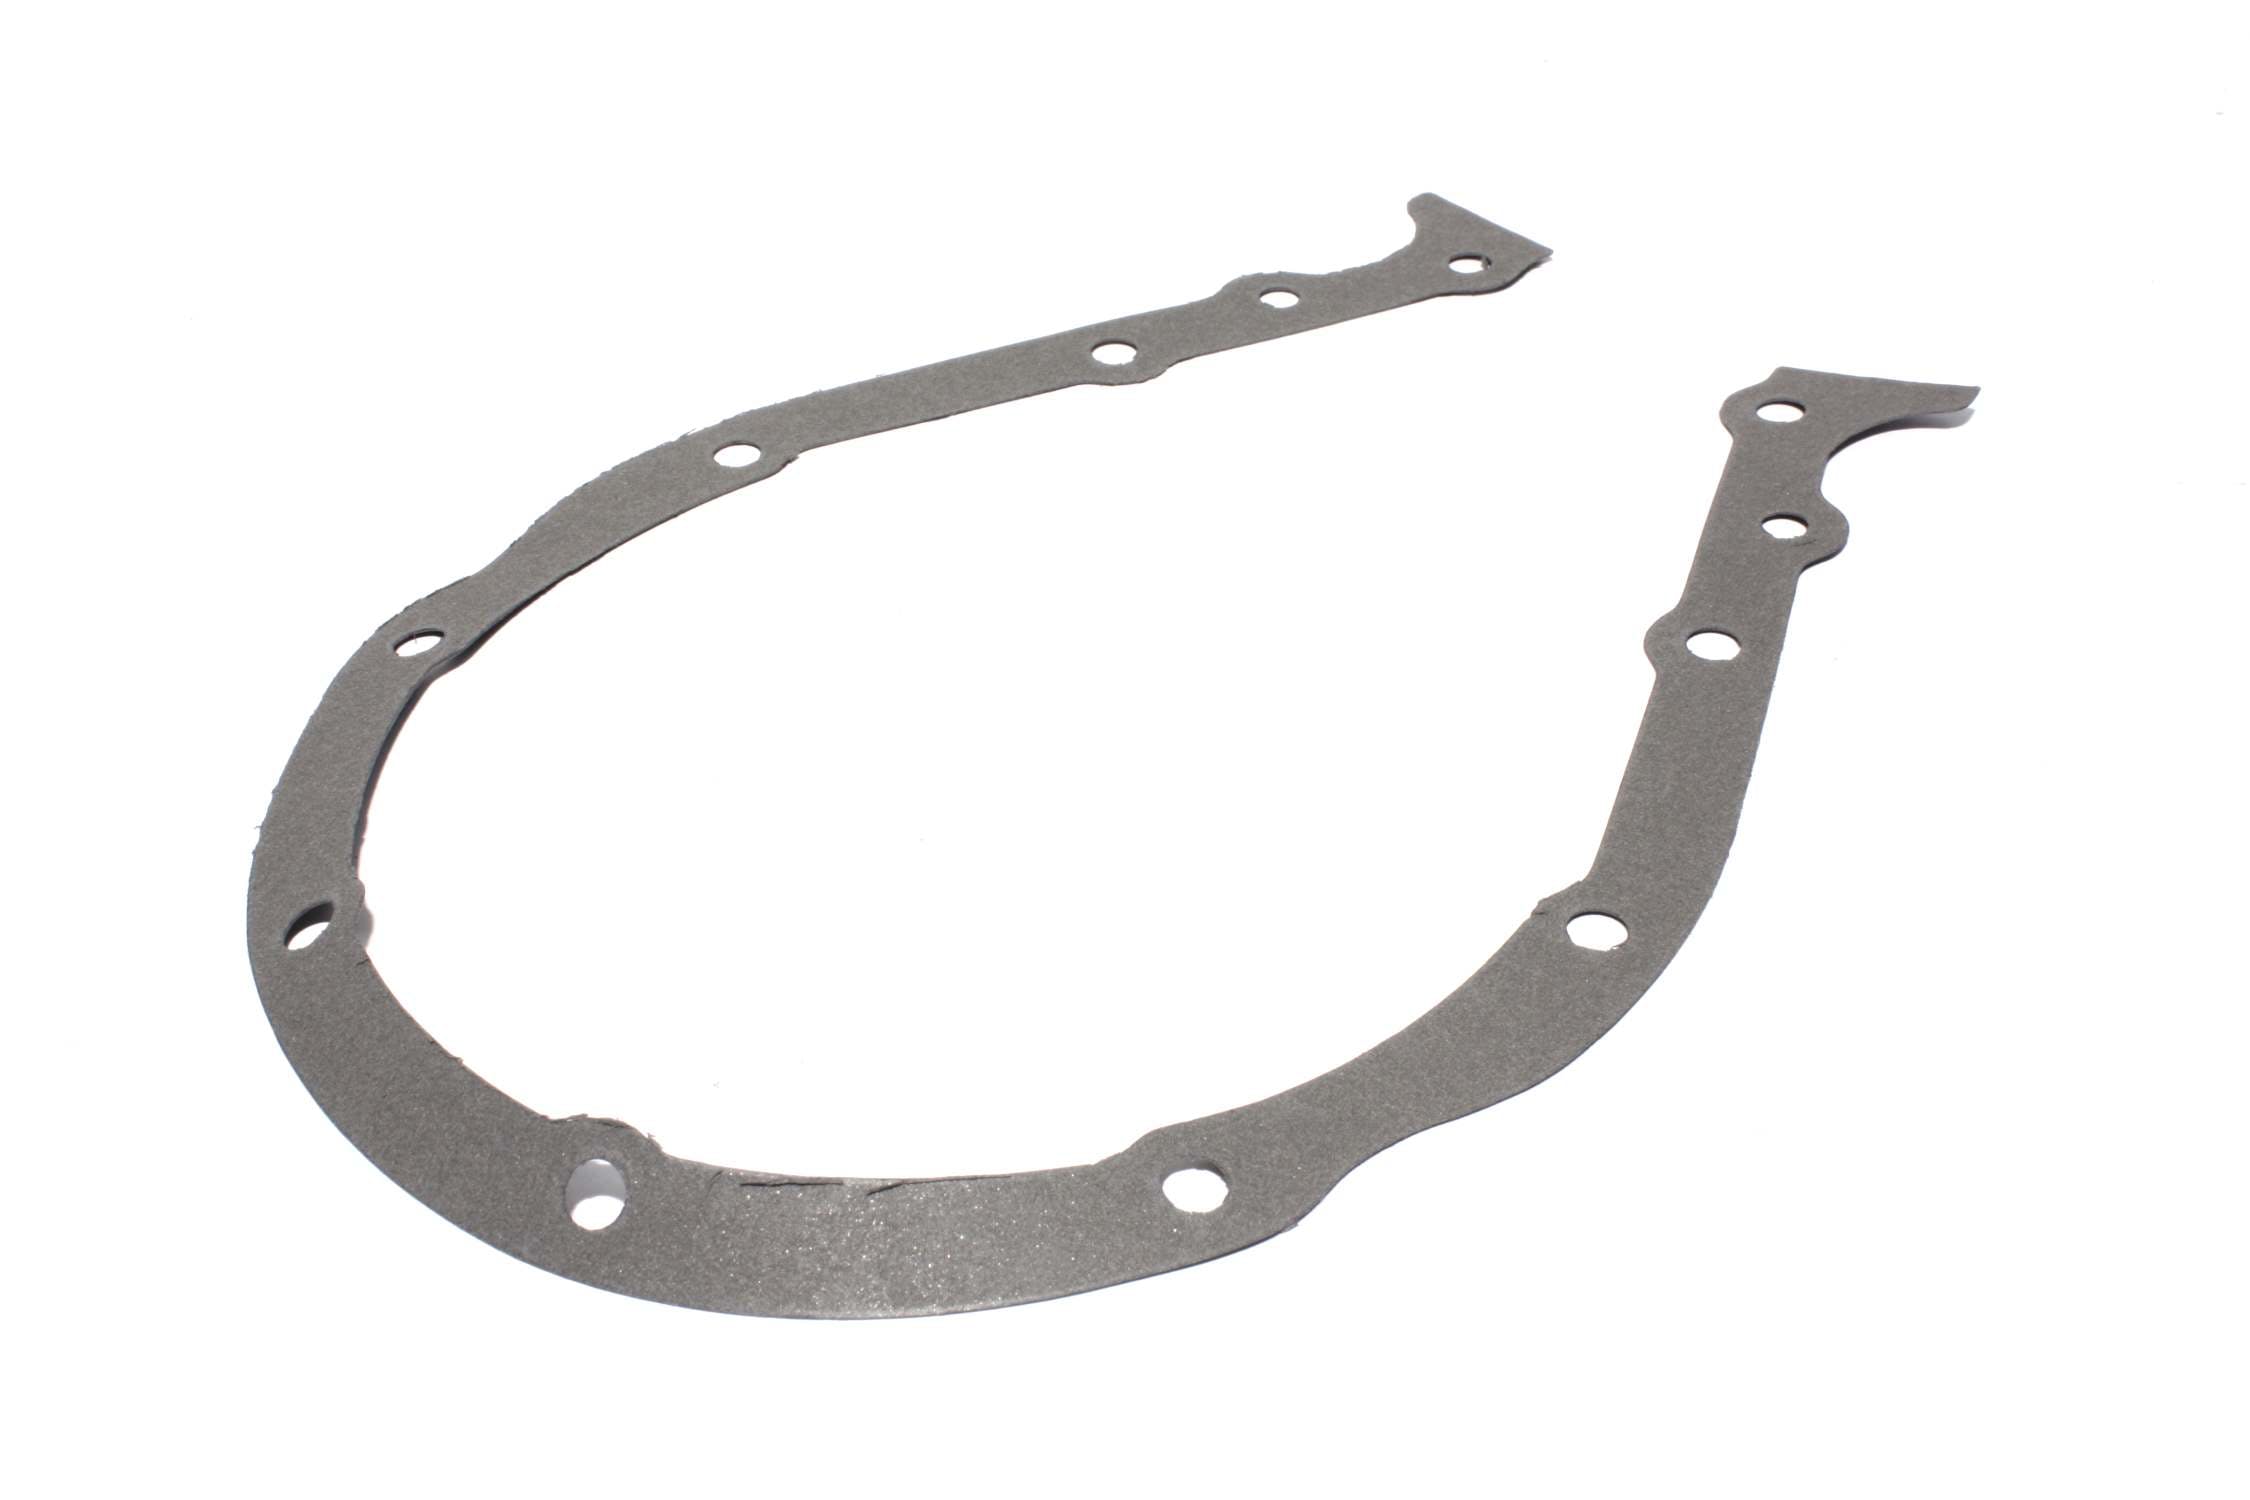 Competition Cams 6200TG Hi-Tech Belt Drive System Main Plate Gasket